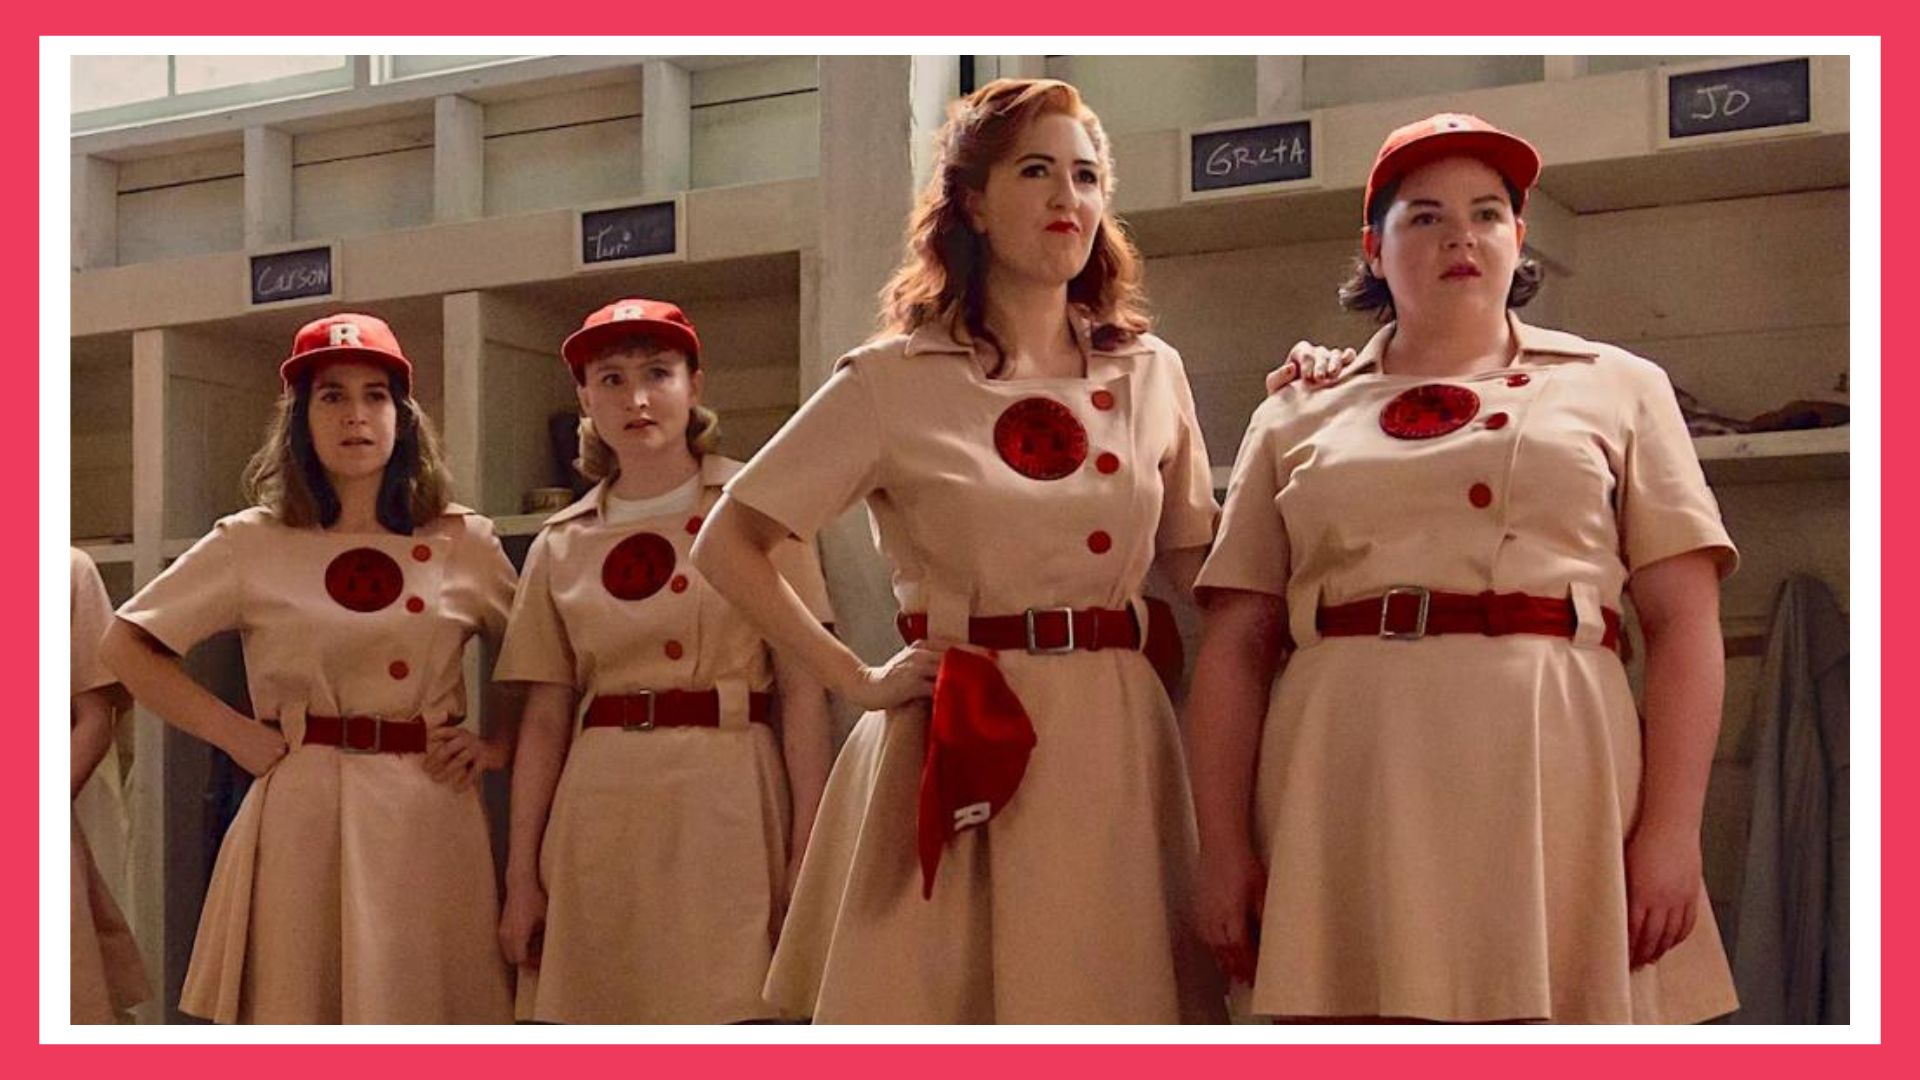 A League of Their Own based on true story